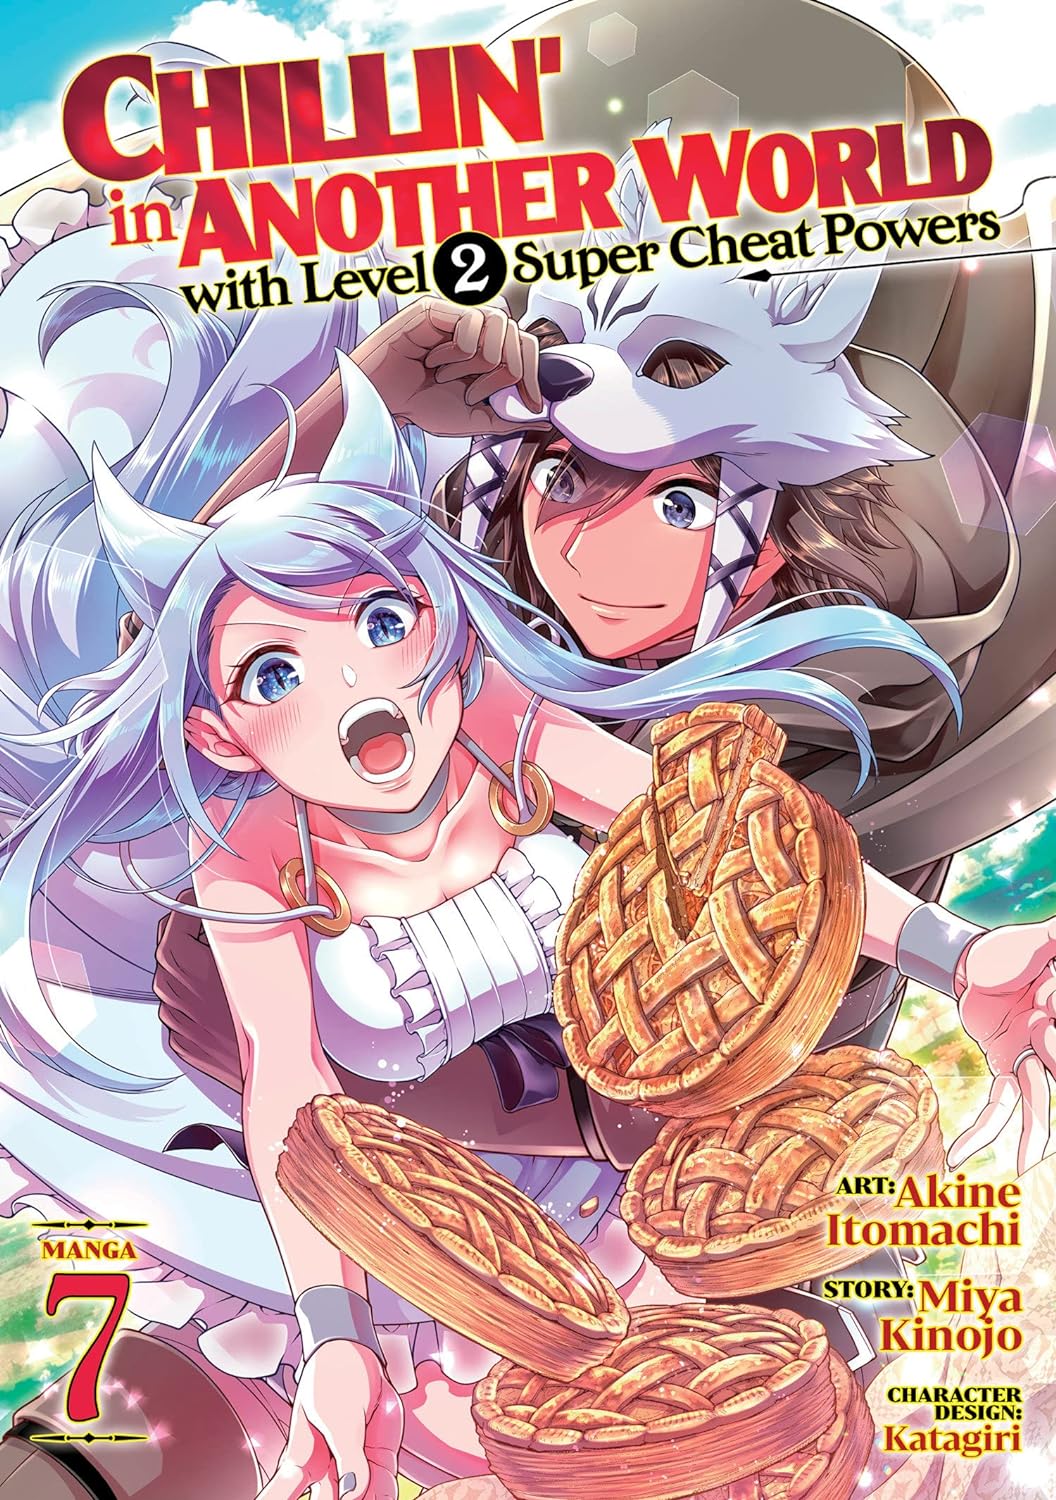 Chillin’ in Another World with Level 2 Super Cheat Powers (Manga) Vol. 07